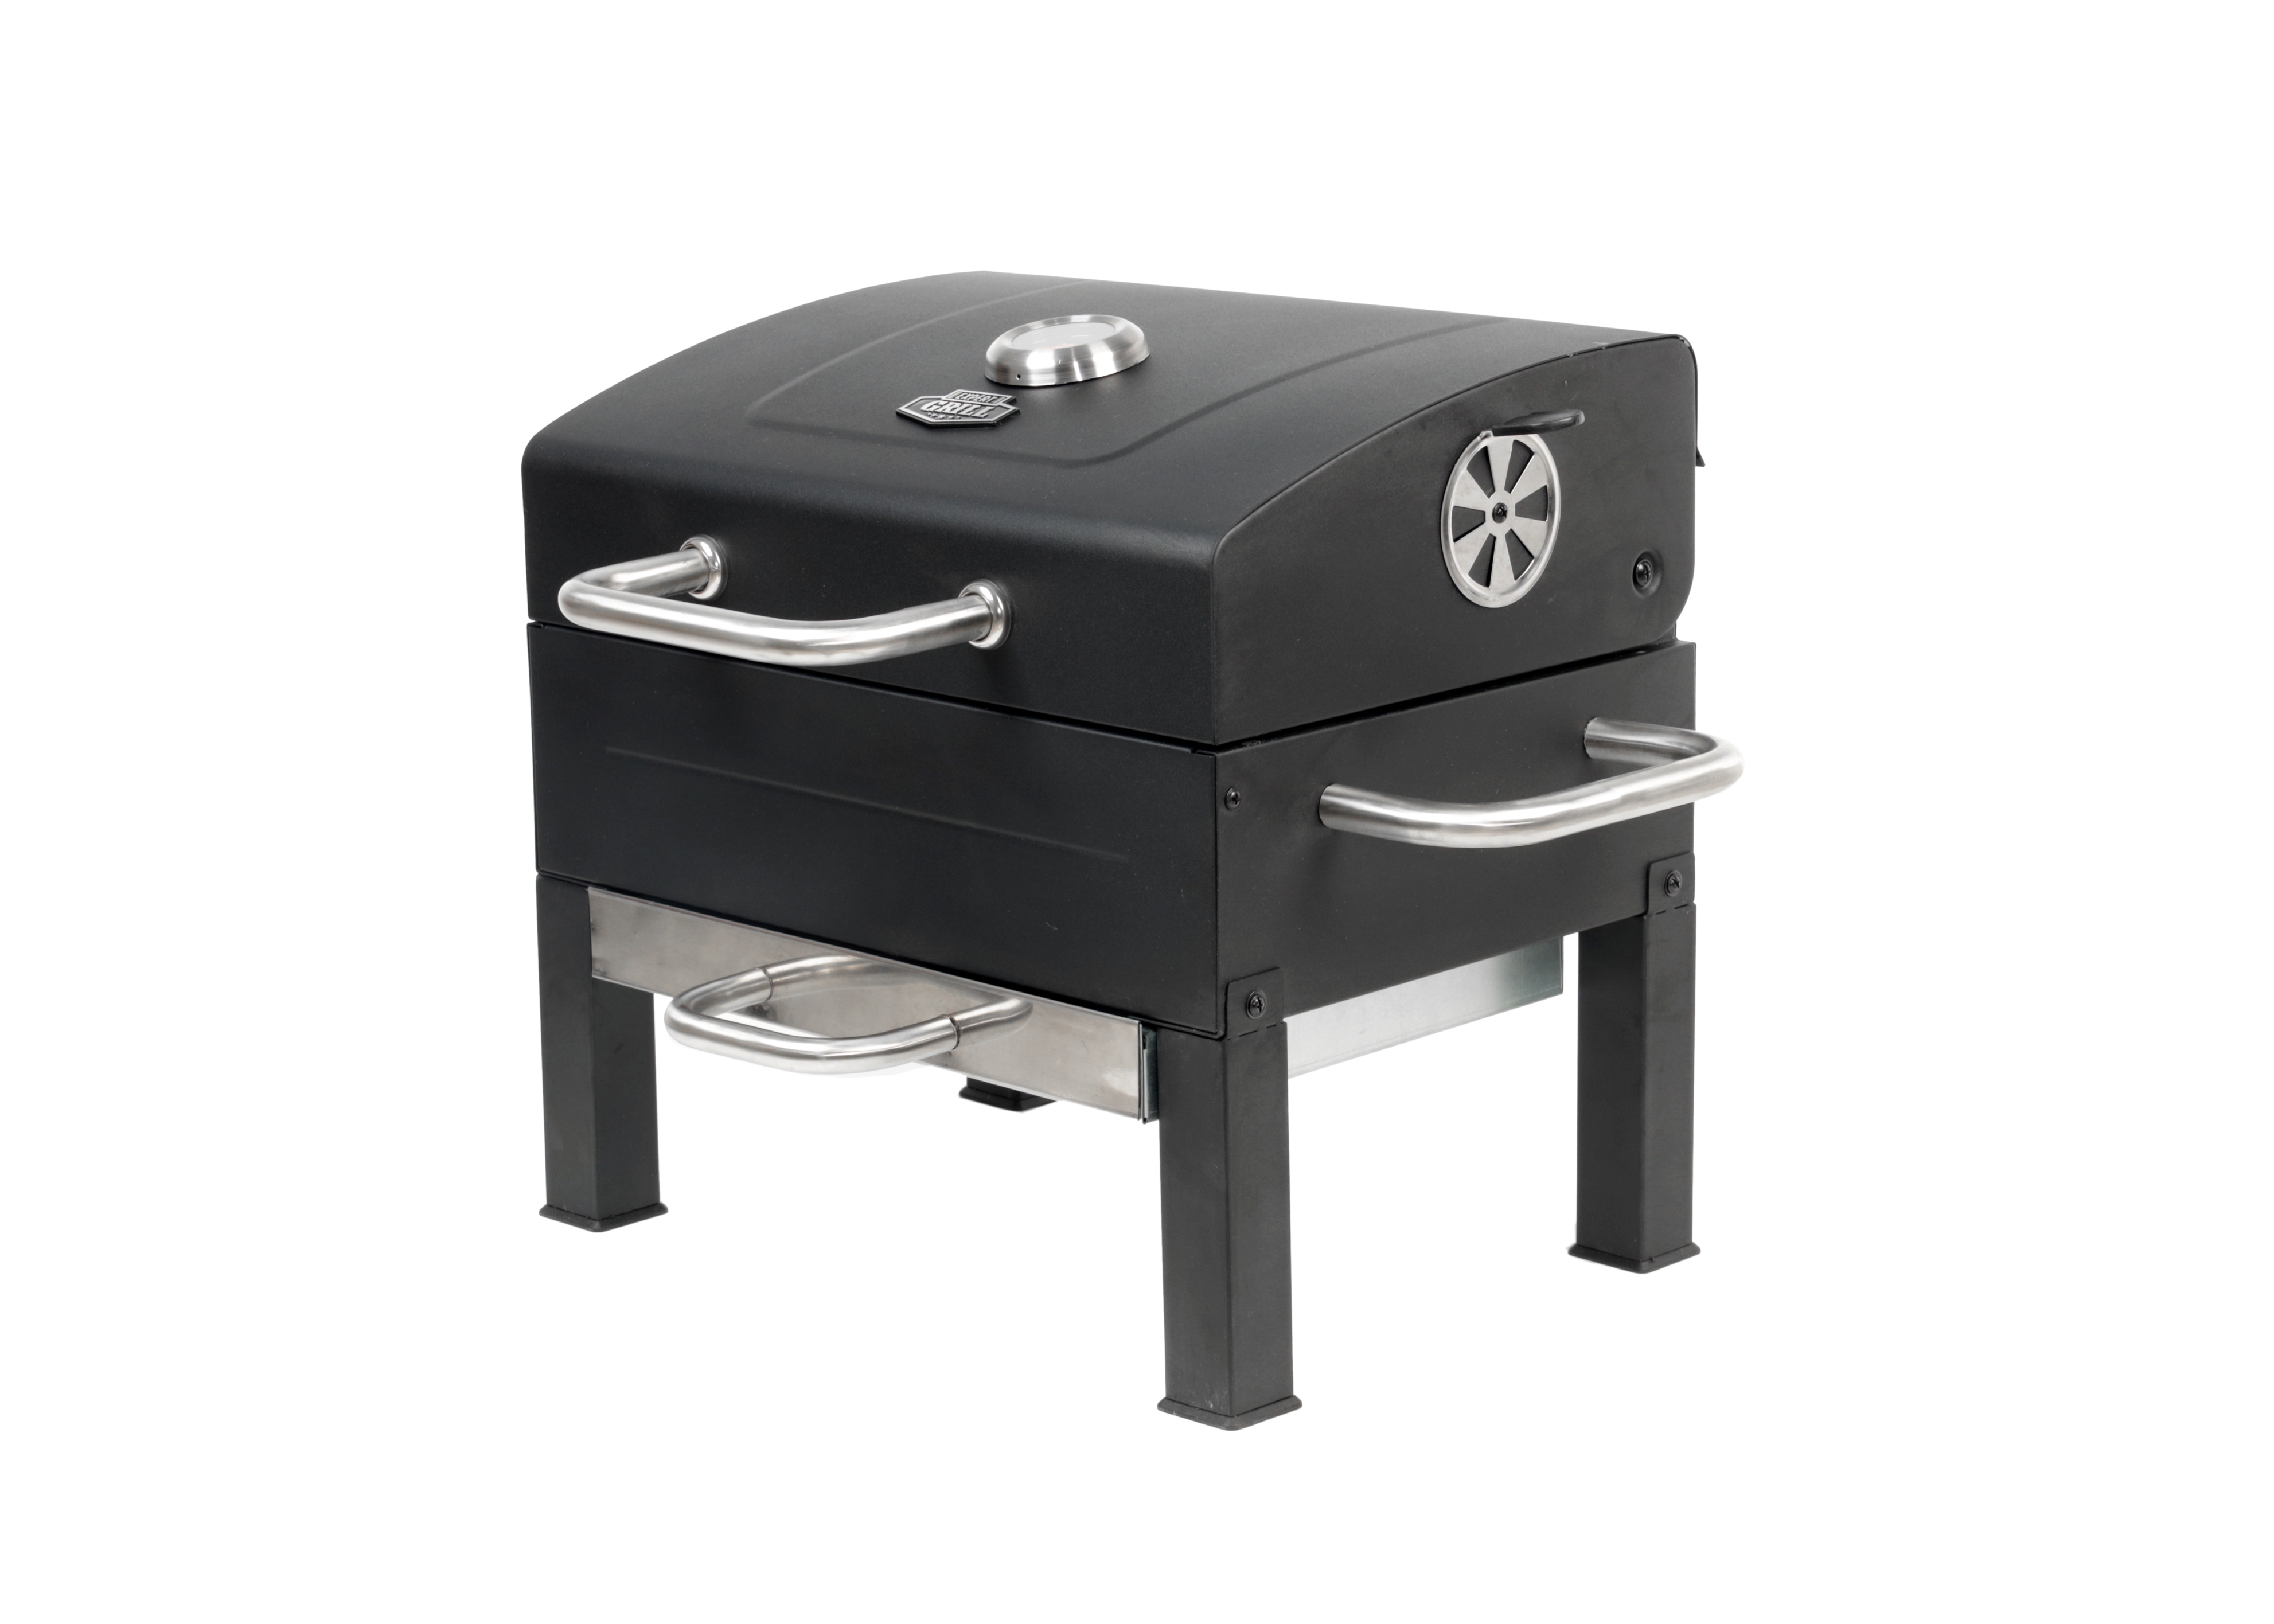 9 Stove Top Grills For Superb Indoor Grilling - The Manual